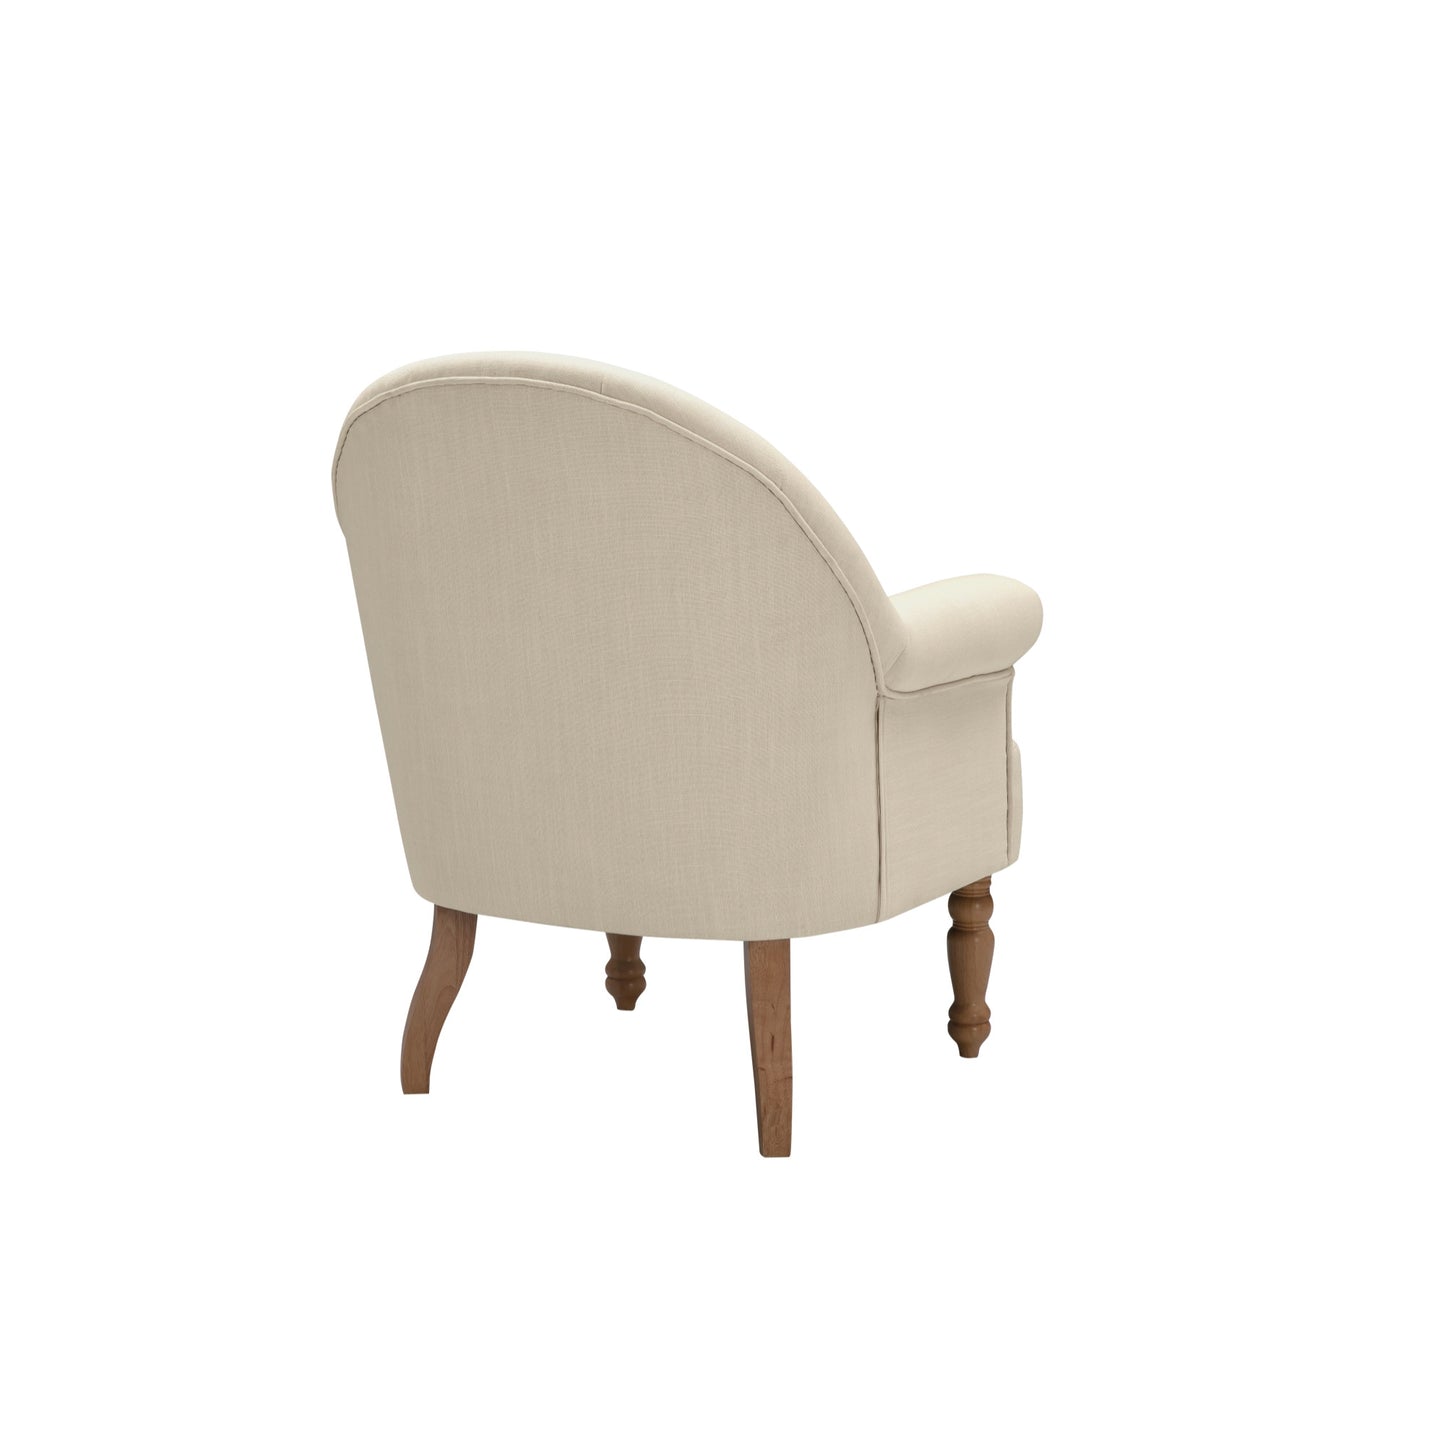 33" Pale Beige And Brown Linen Arm Chair